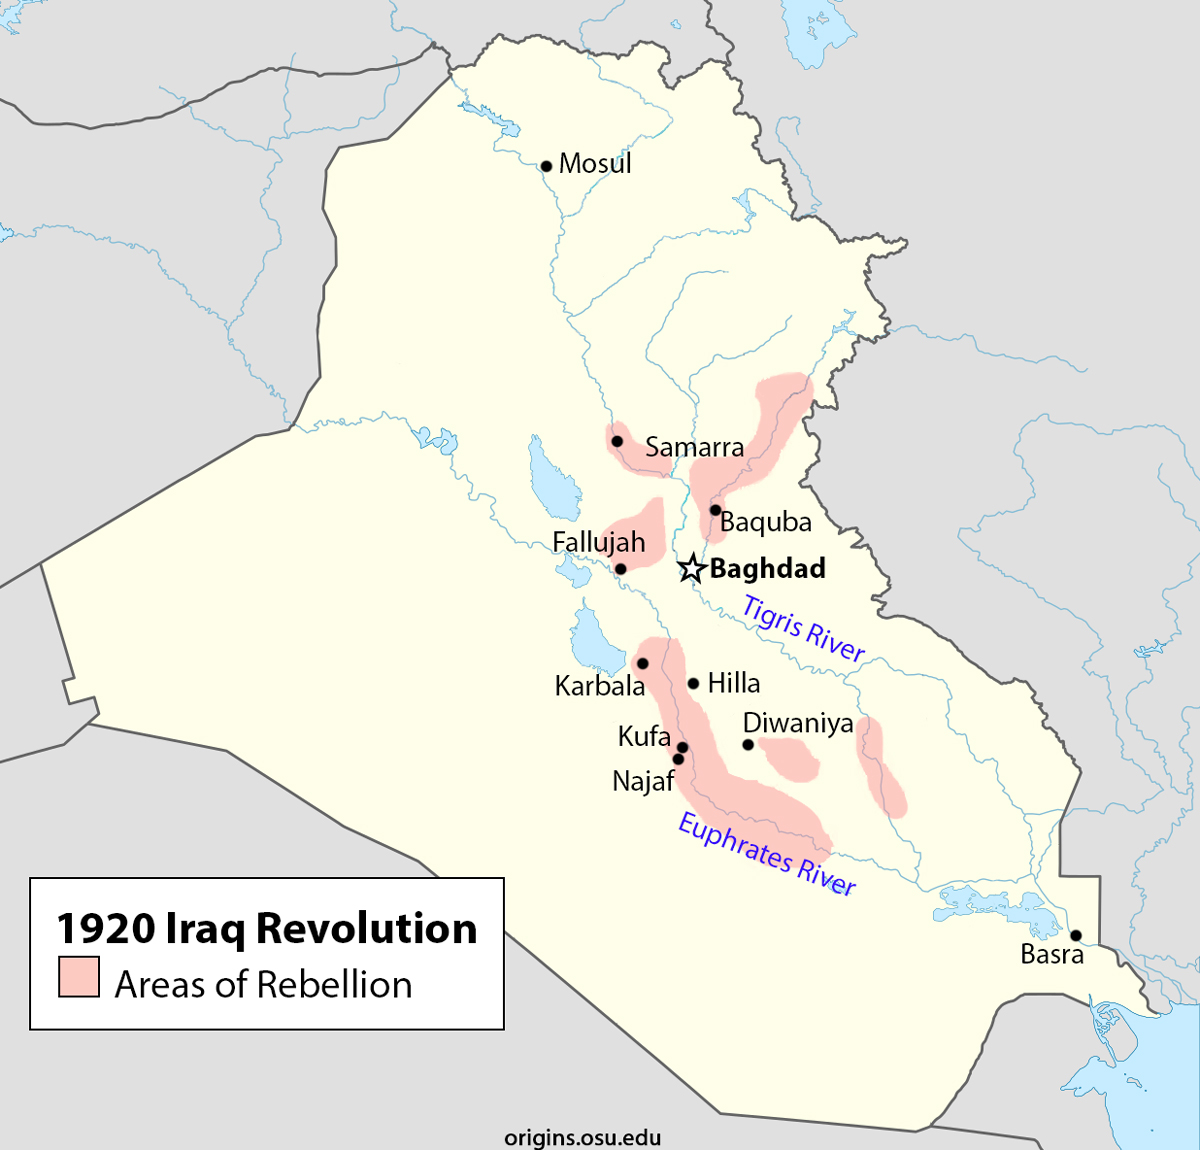 Map of Iraq showing major areas of rebellion in 1920.